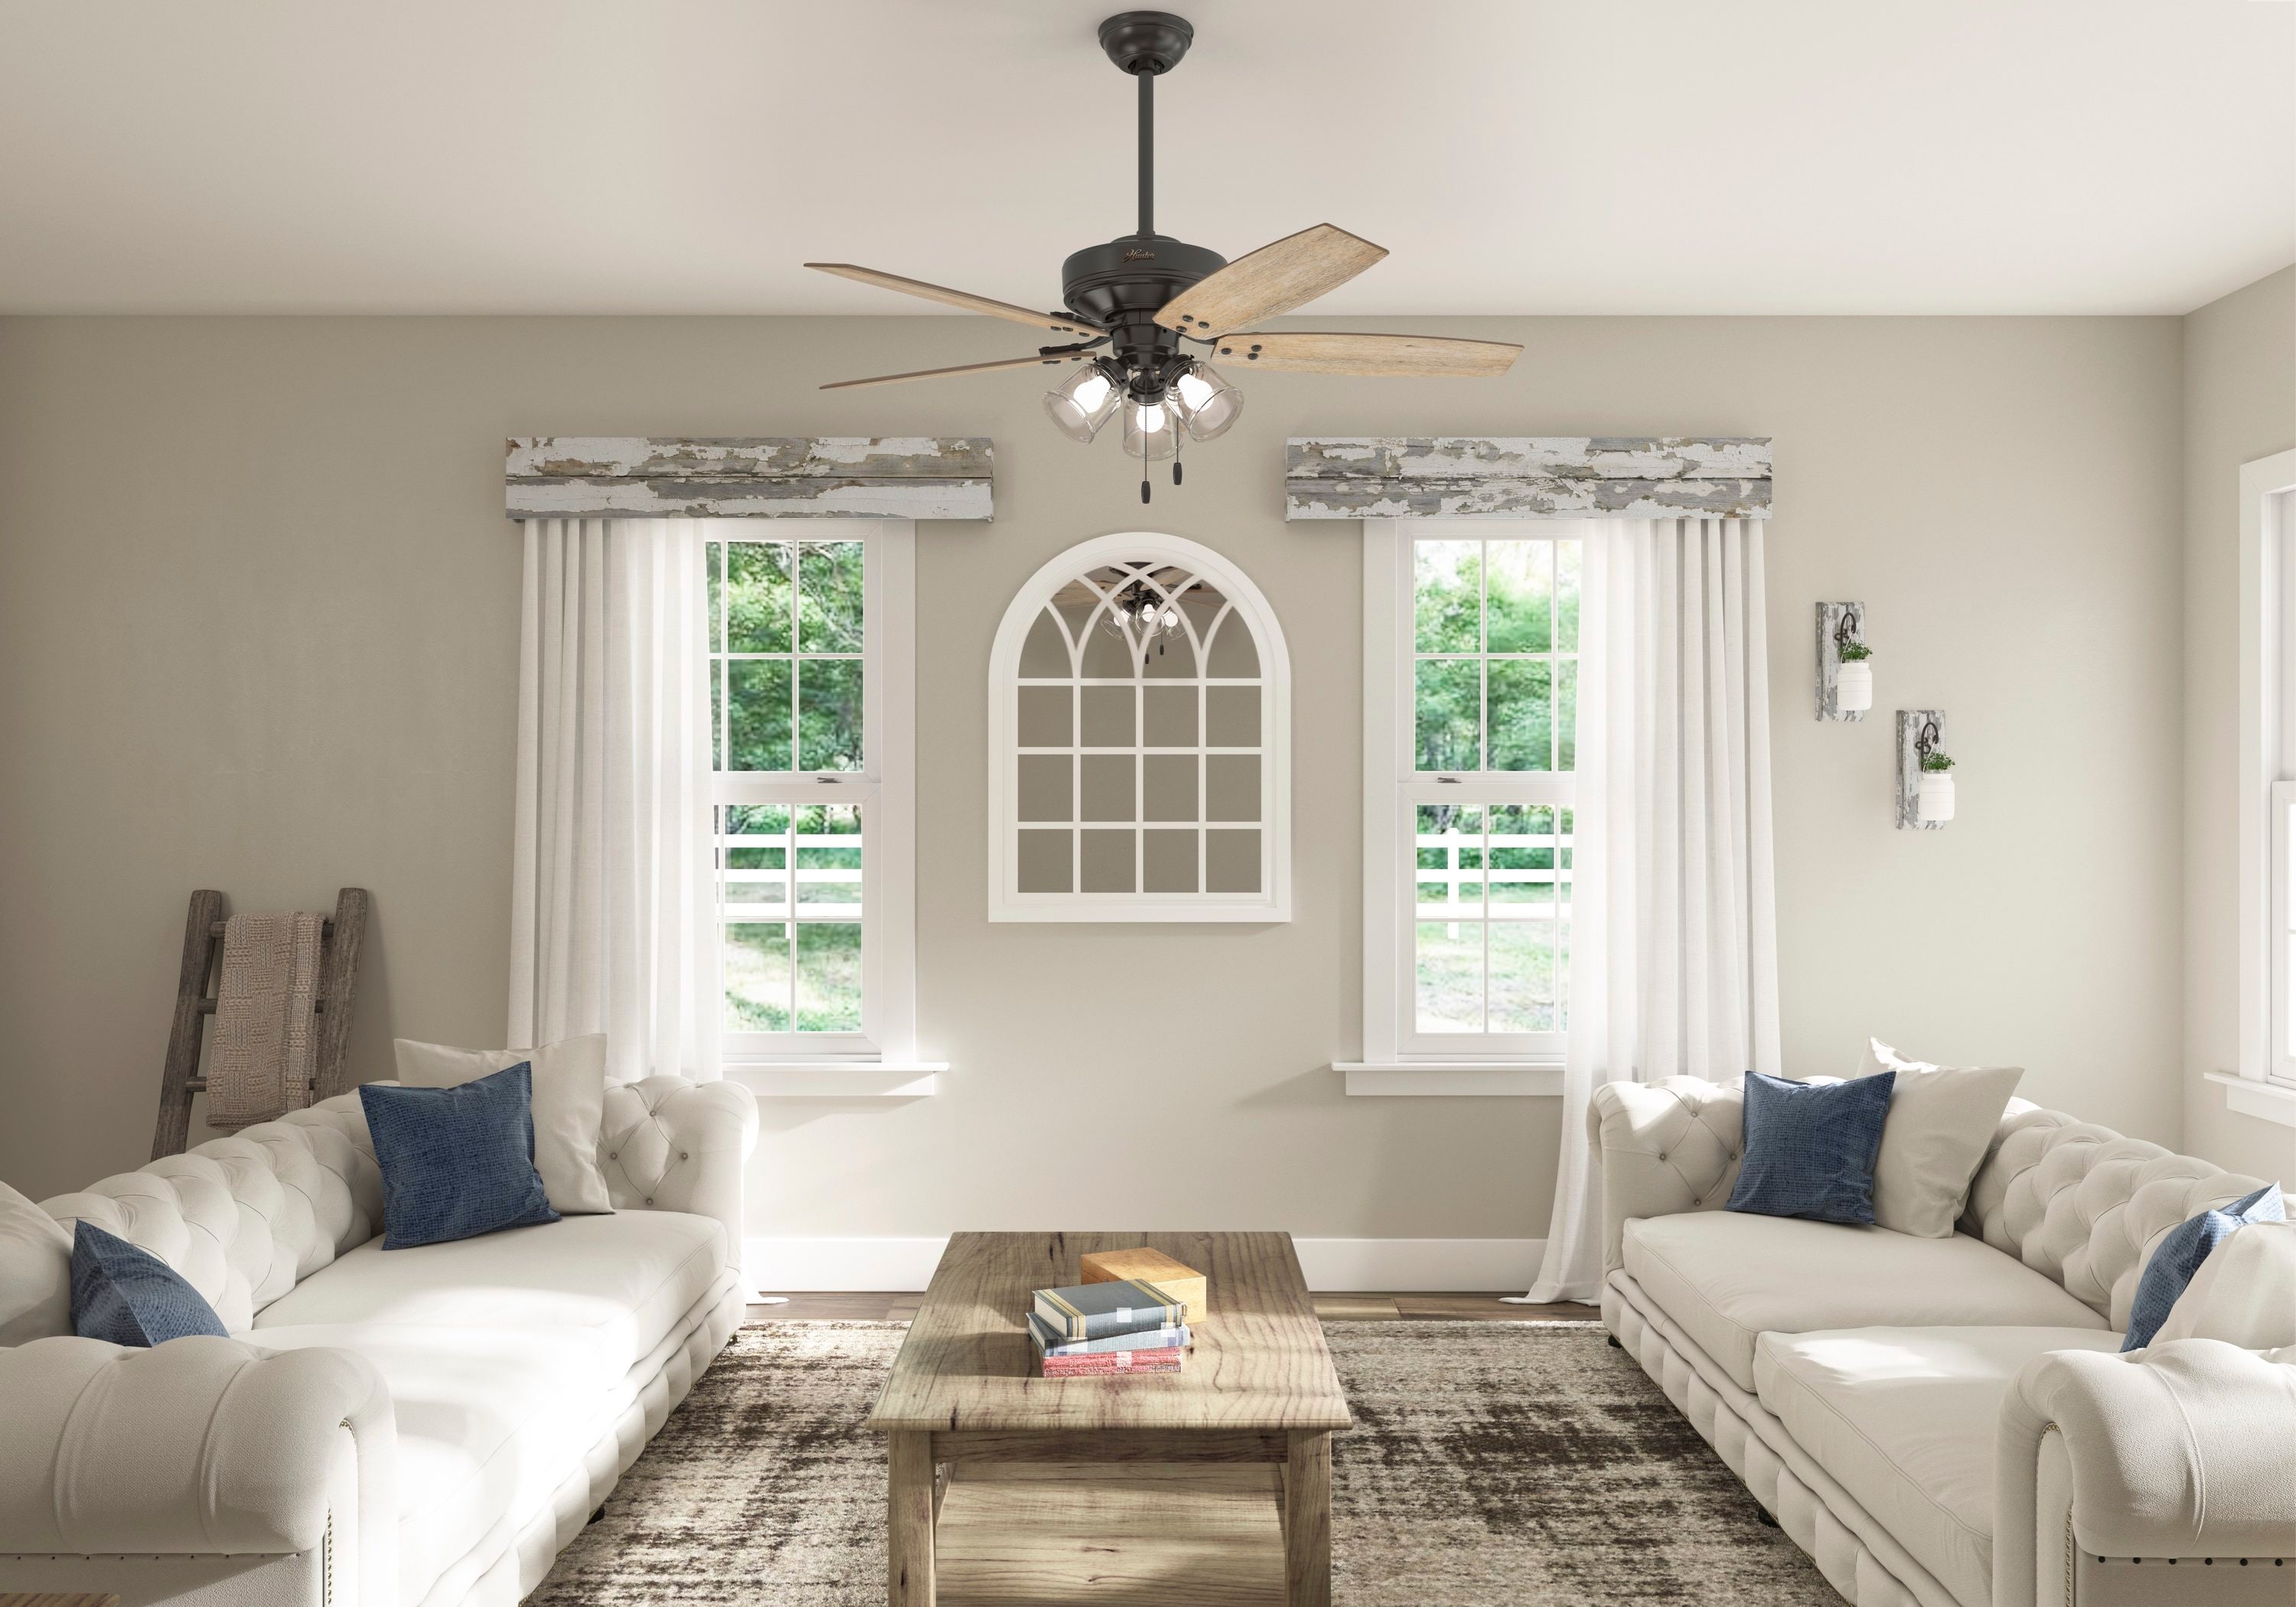 Details about  / Hunter Fan 52 in Noble Bronze Outdoor Ceiling Fan with Light Kit and Pull Chain